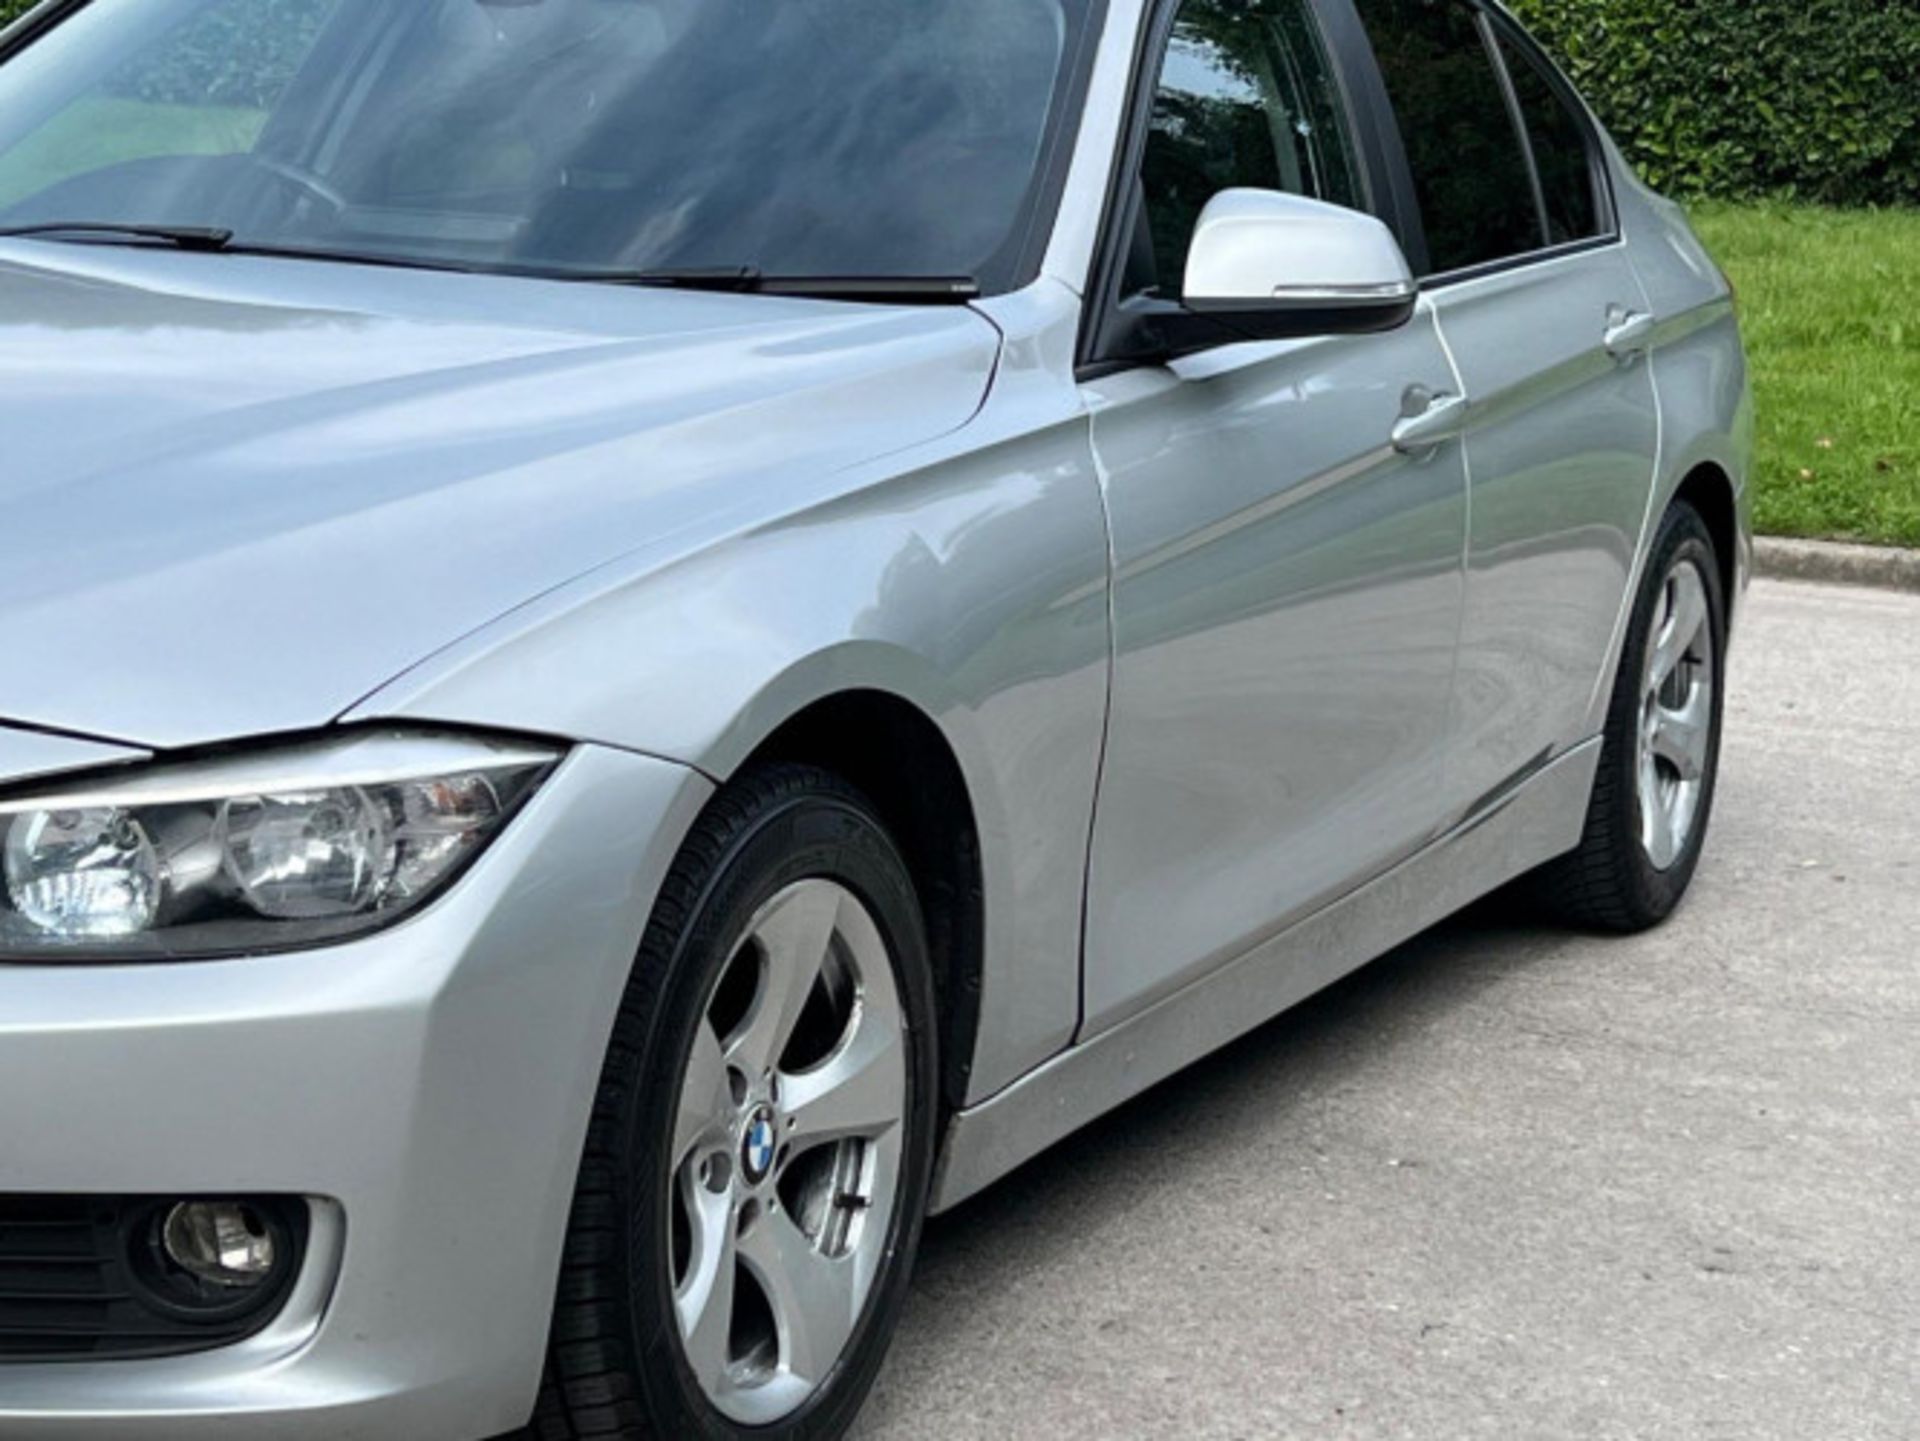 BMW 3 SERIES 2.0 DIESEL ED START STOP - A WELL-MAINTAINED GEM >>--NO VAT ON HAMMER--<< - Image 222 of 229